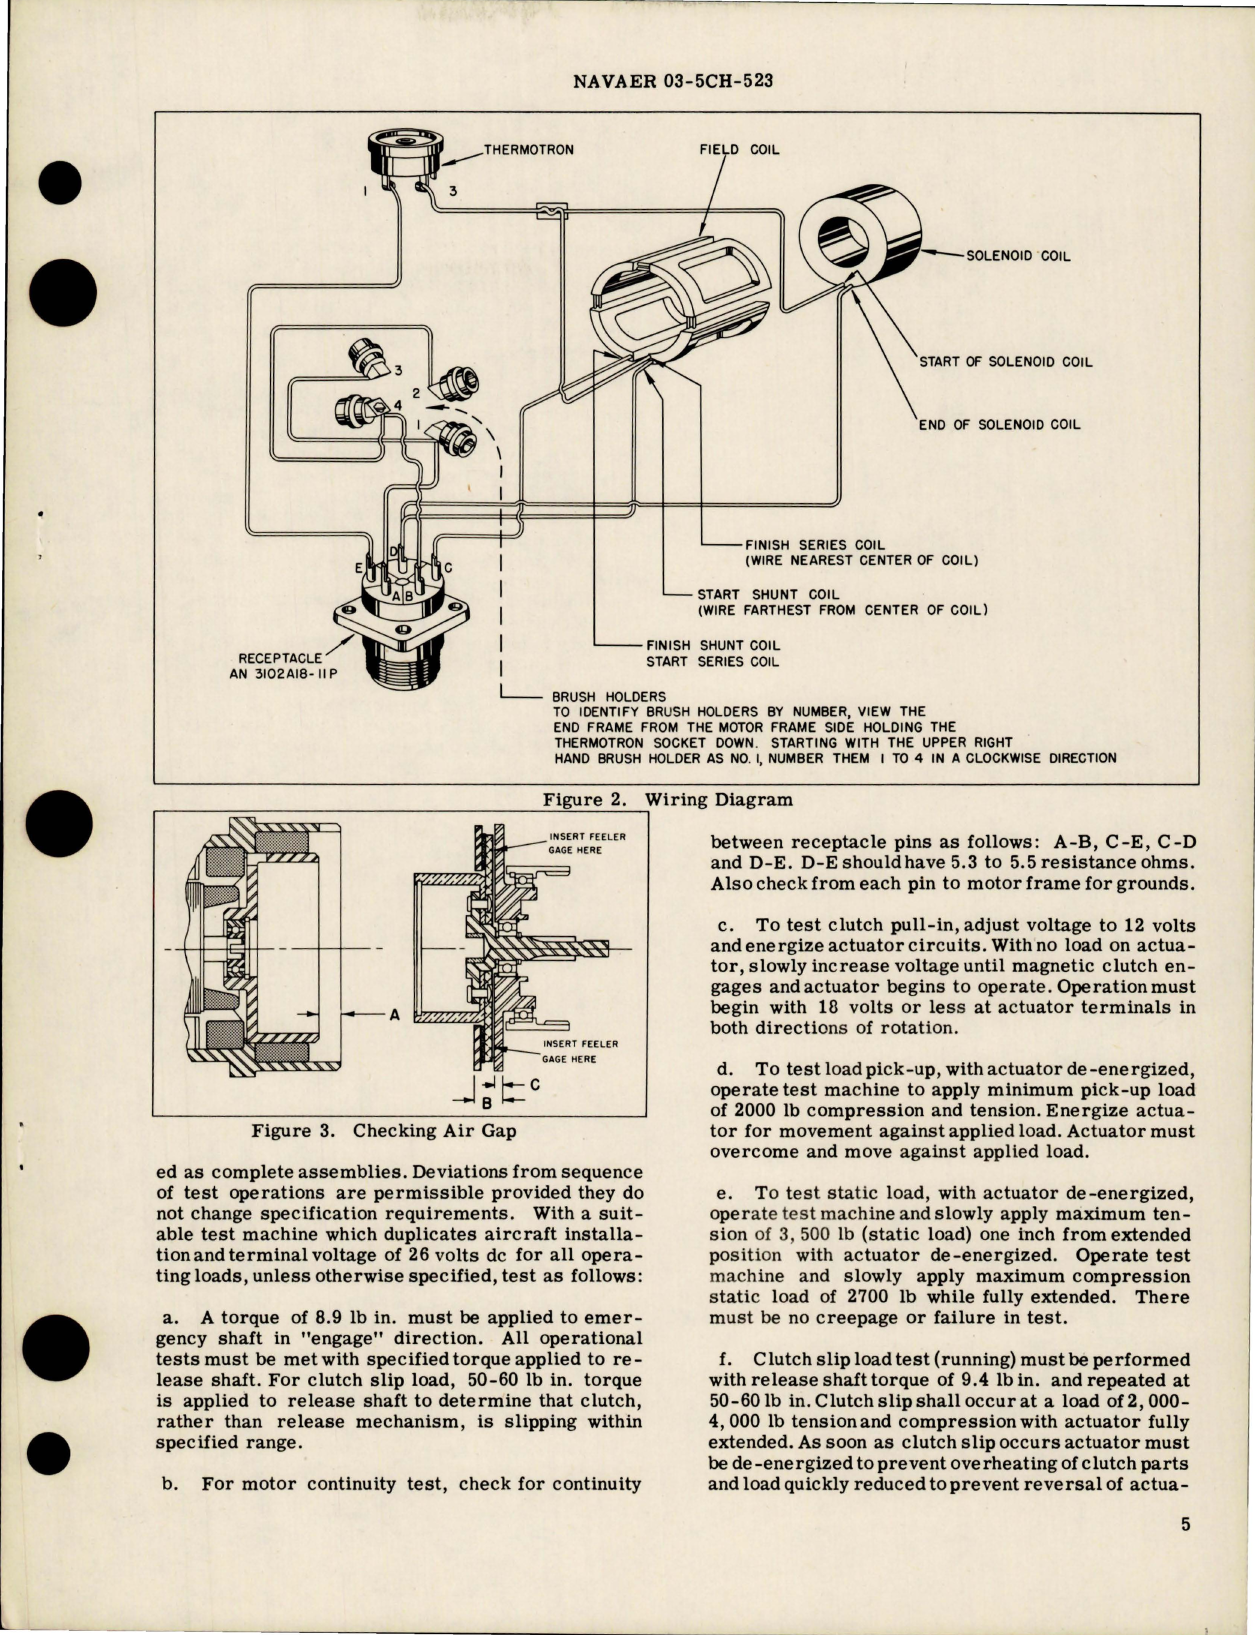 Sample page 5 from AirCorps Library document: Overhaul Instructions with Parts Breakdown for Actuator - Model A7621-3 and A7621-5 